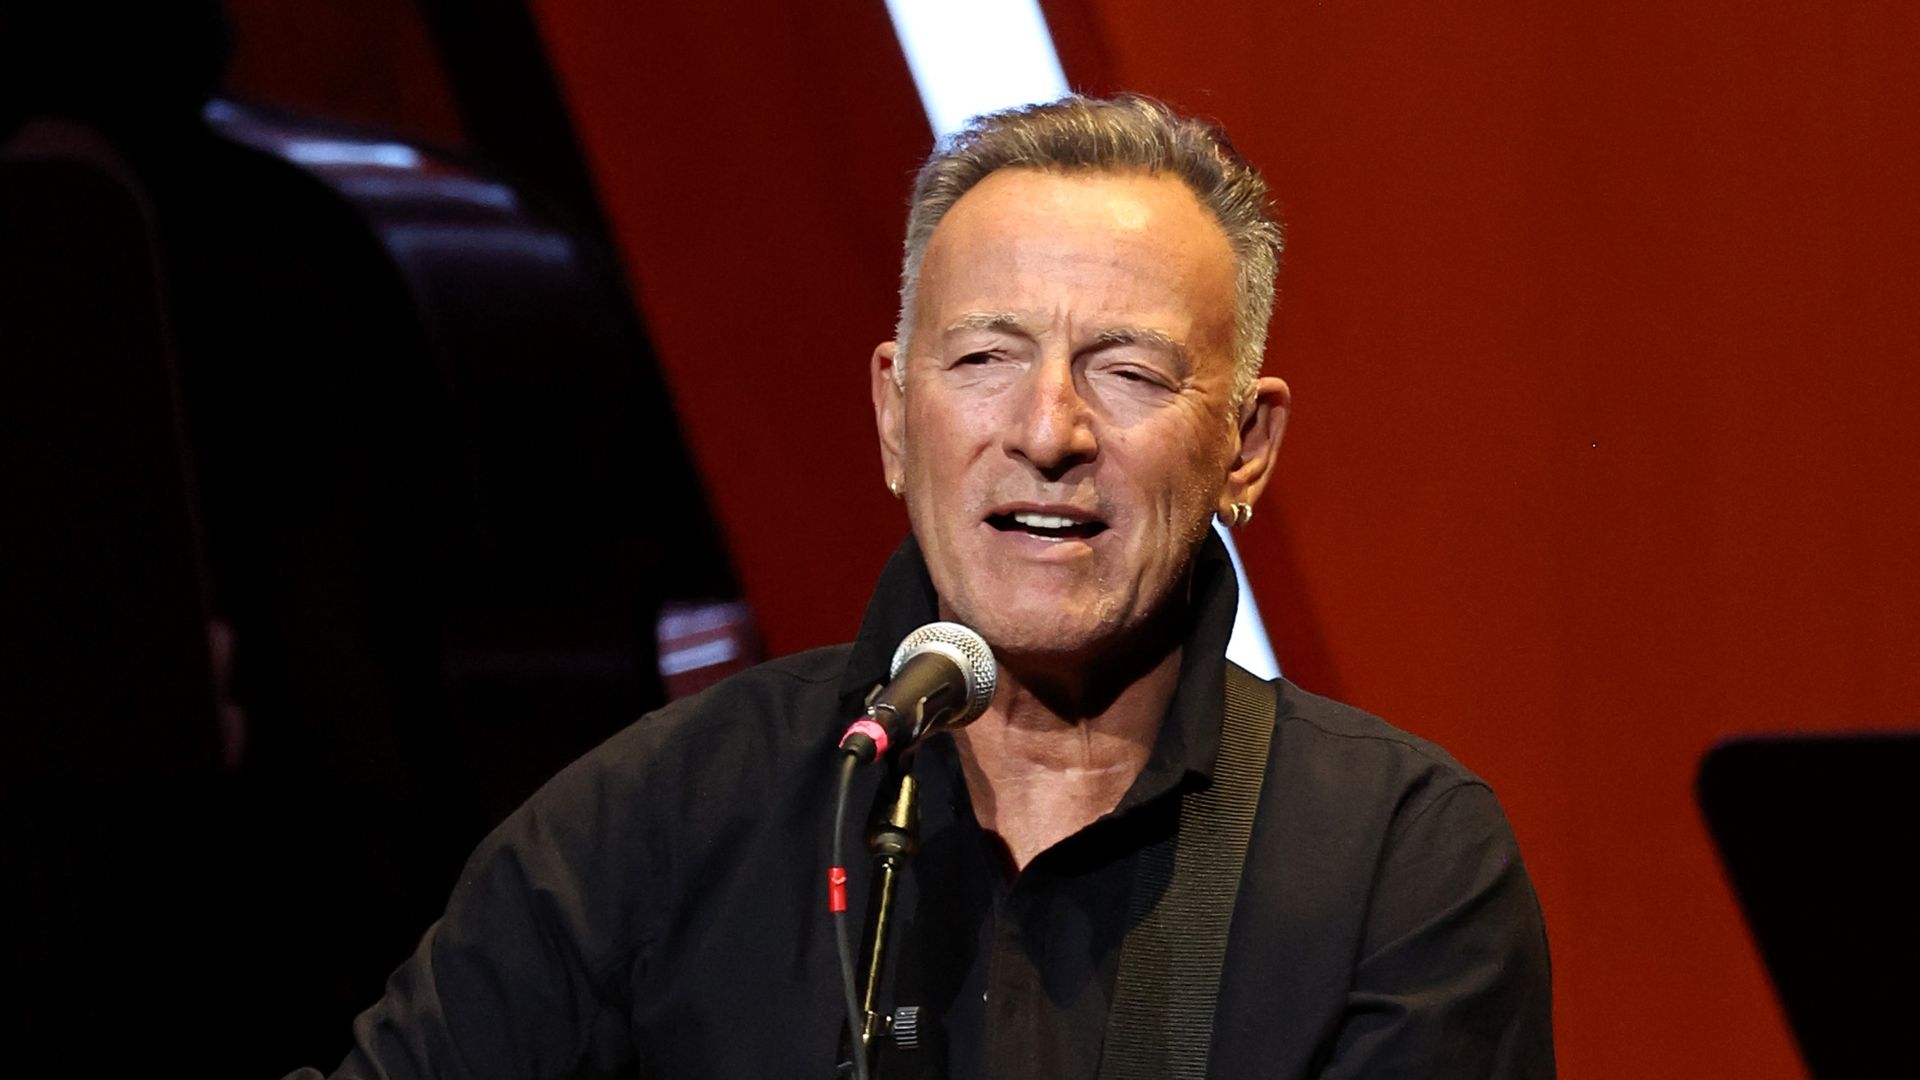 Bruce Springsteen opens up about future of his career after painful health battle: 'It was killing me'